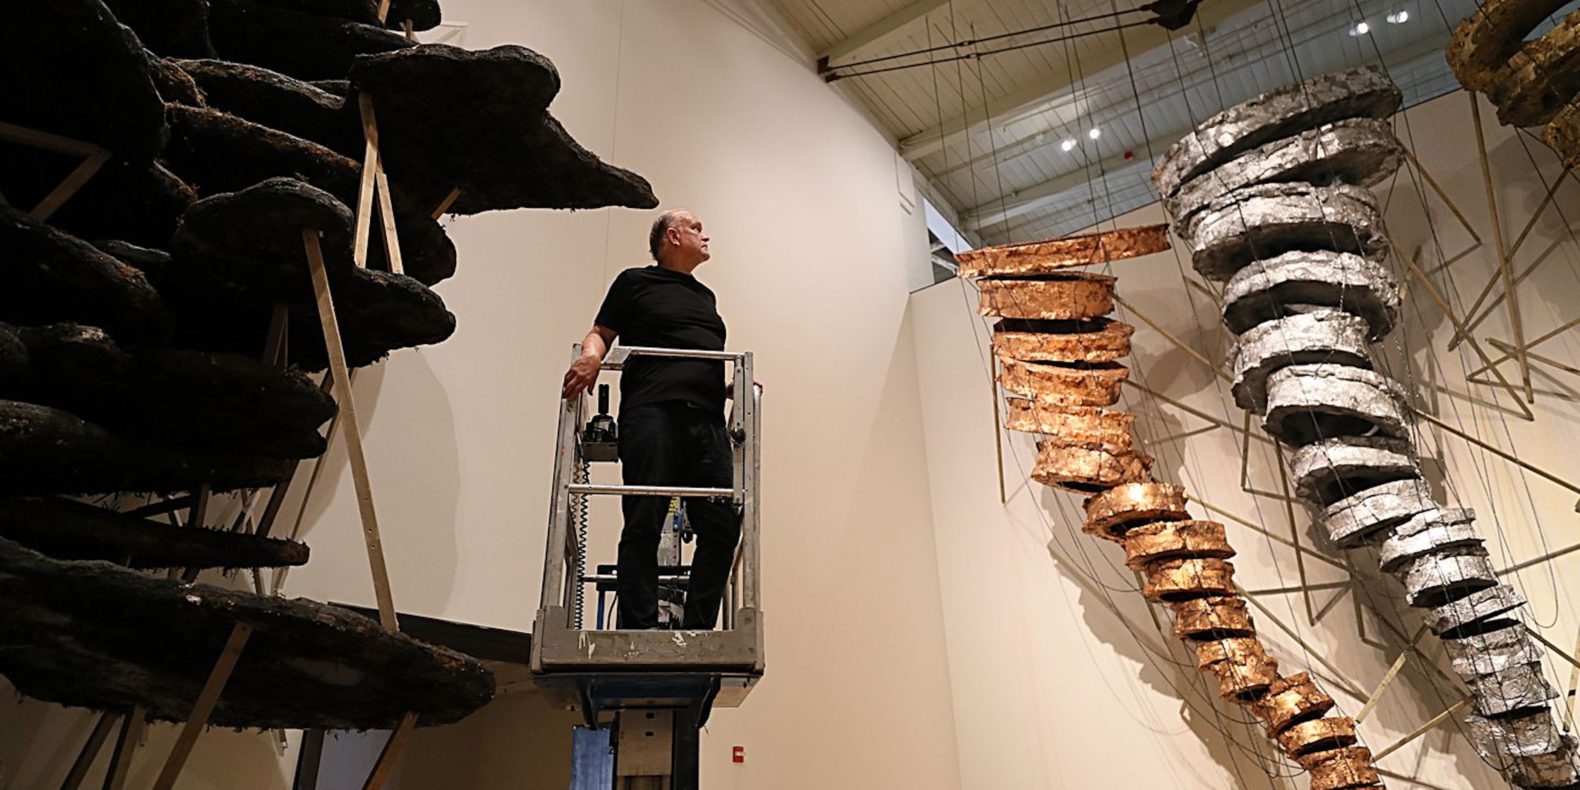 Artist Blane De St. Croix put the final touches on "How to Move a Landscape" at Mass MoCA.SUZANNE KREITER/GLOBE STAFF